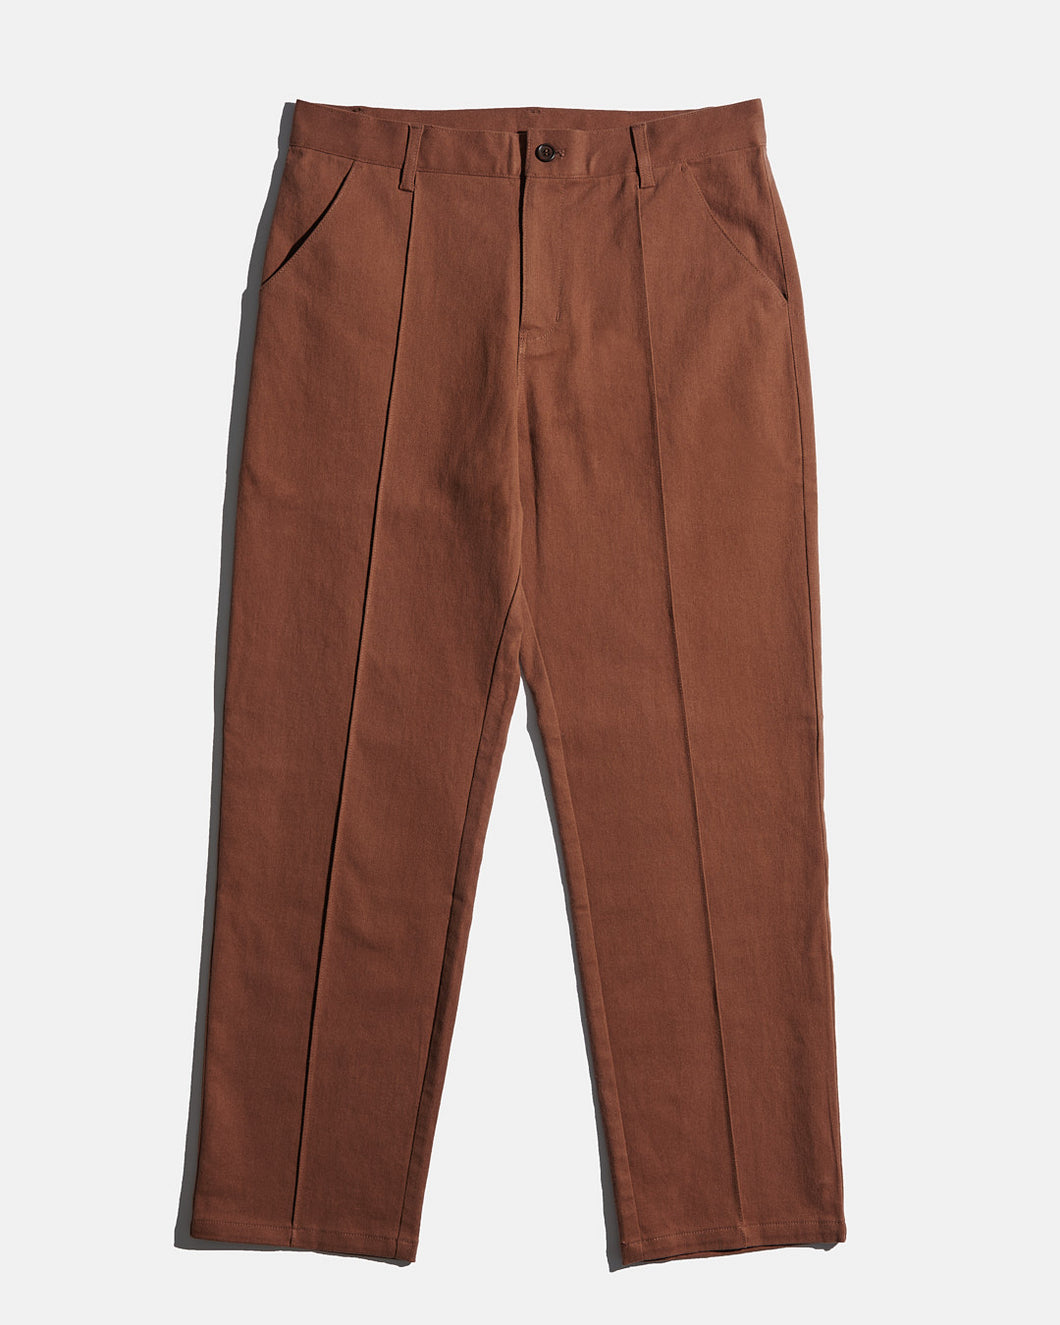 Stitched Crease Work Pant